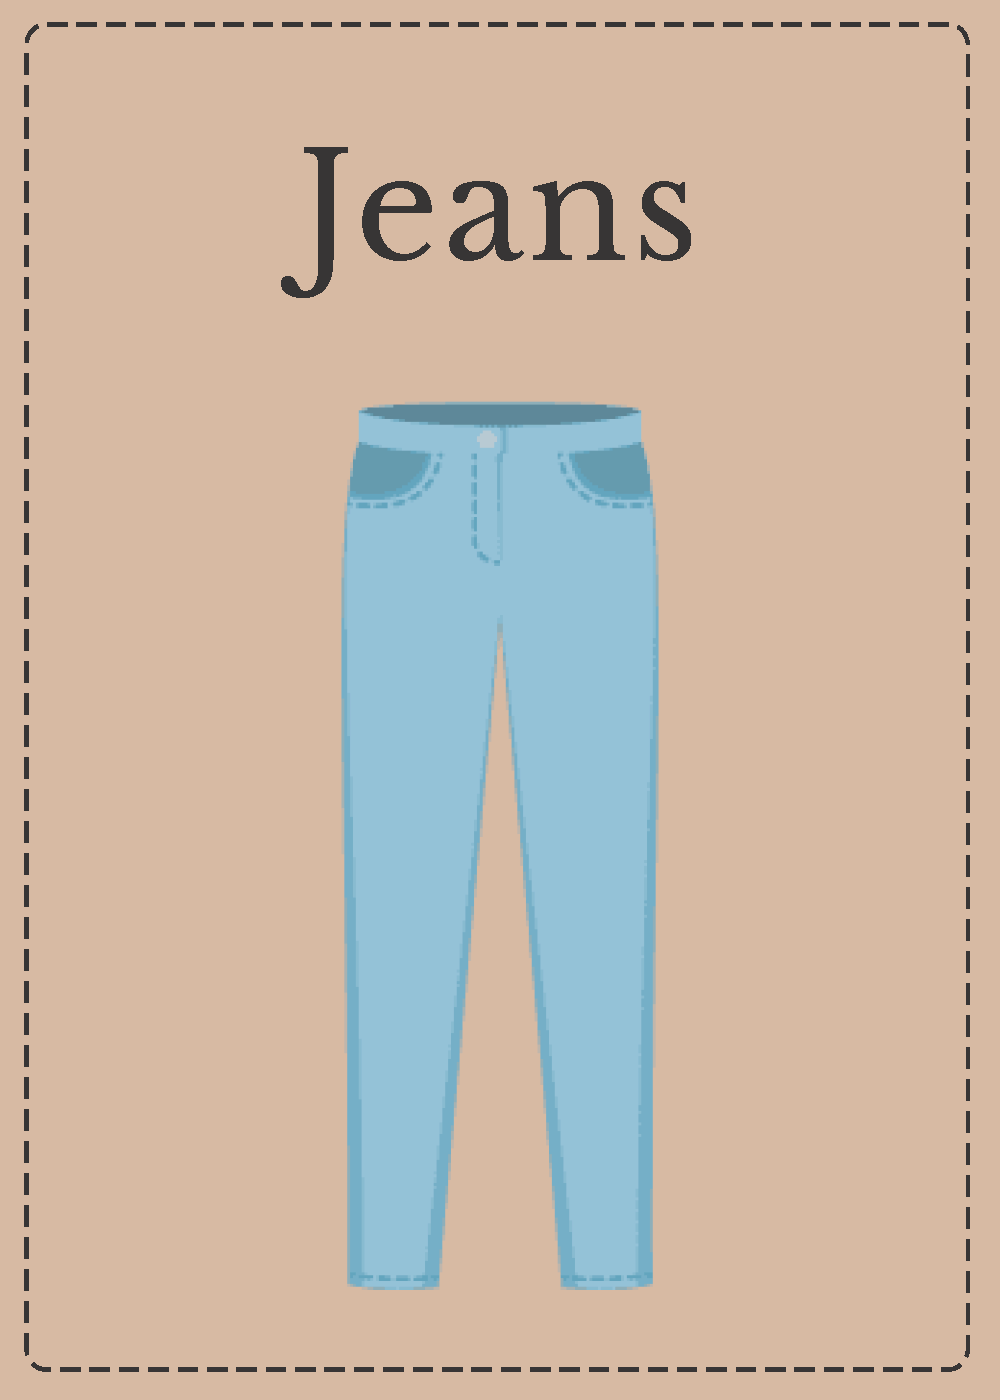 Free Clothing Flashcards - Download in Word, Google Docs, PowerPoint ...